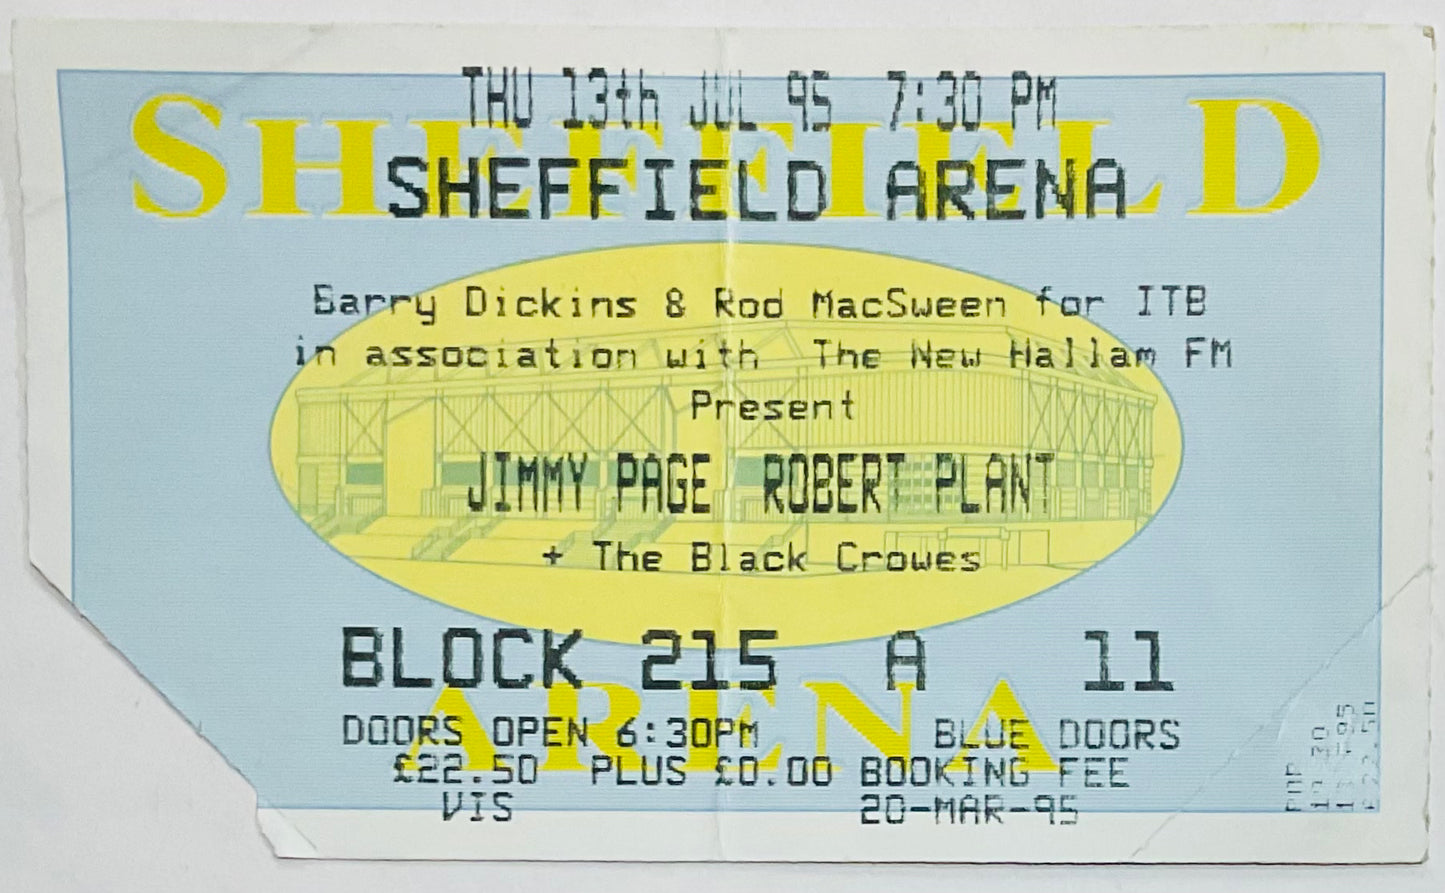 Jimmy Page Robert Plant Black Crowes Original Used Concert Ticket Sheffield Arena 13th Jul 1995